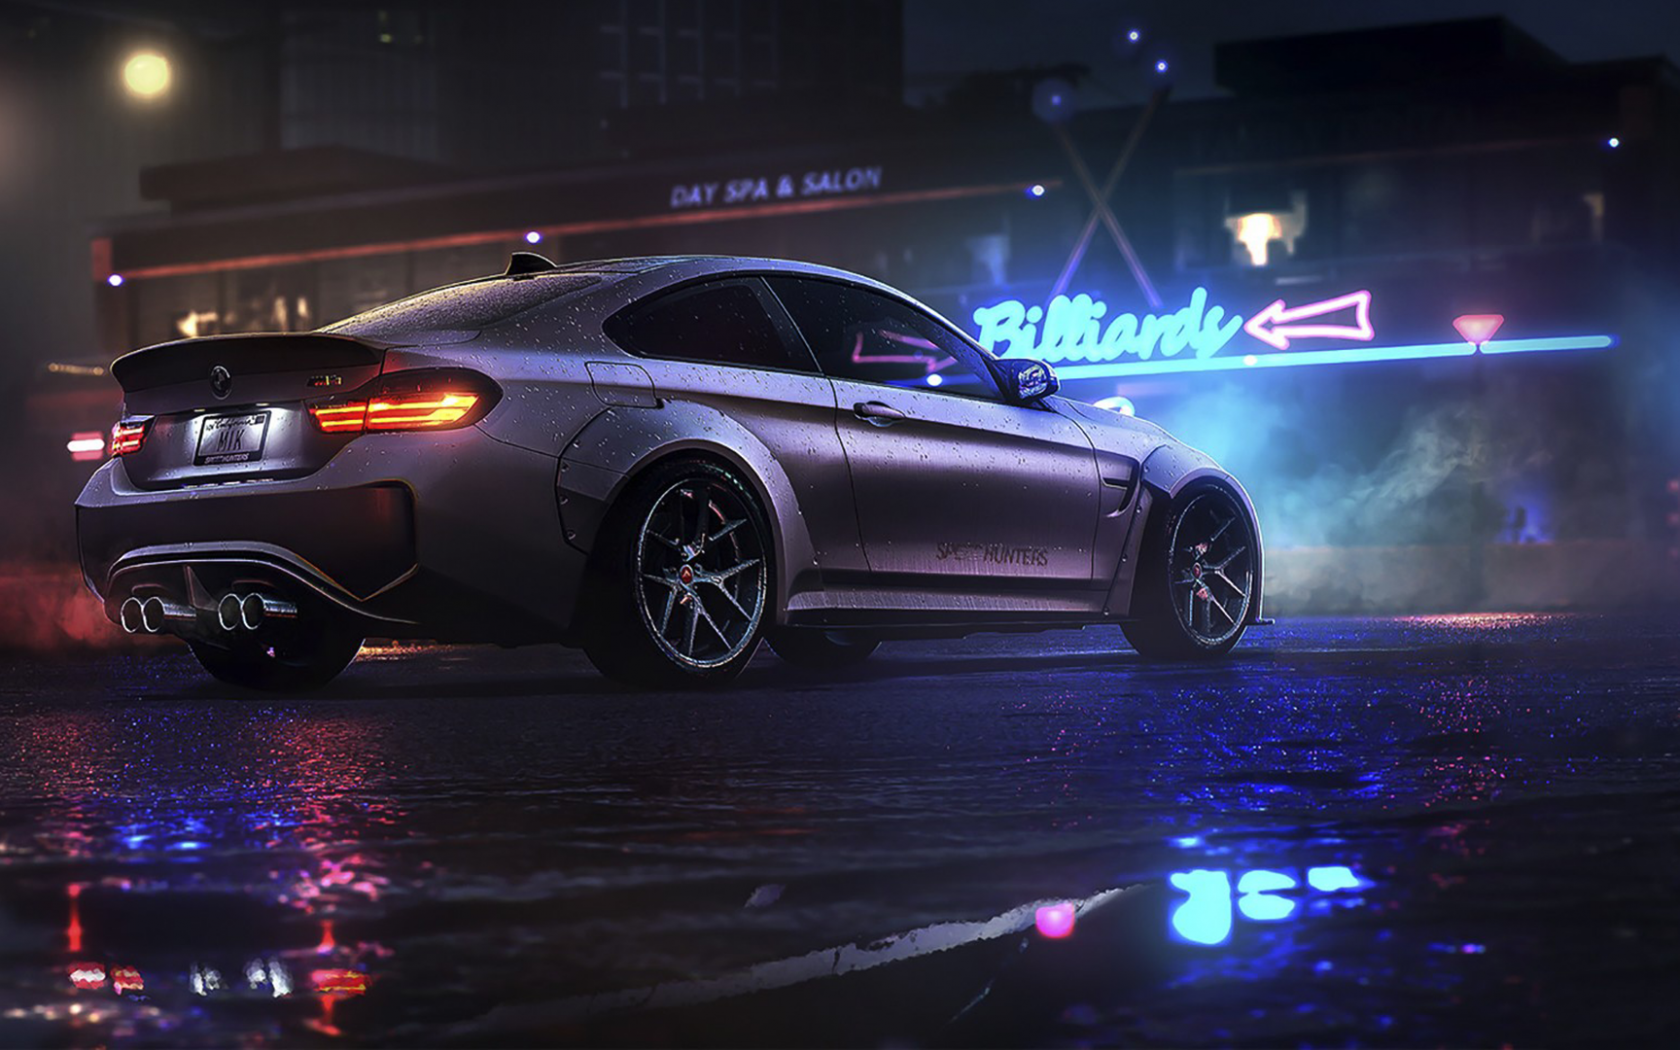 Download 1680x1050 Bmw, Side View, Water Drops, Night, Sport, Cars Wallpaper for MacBook Pro 15 inch